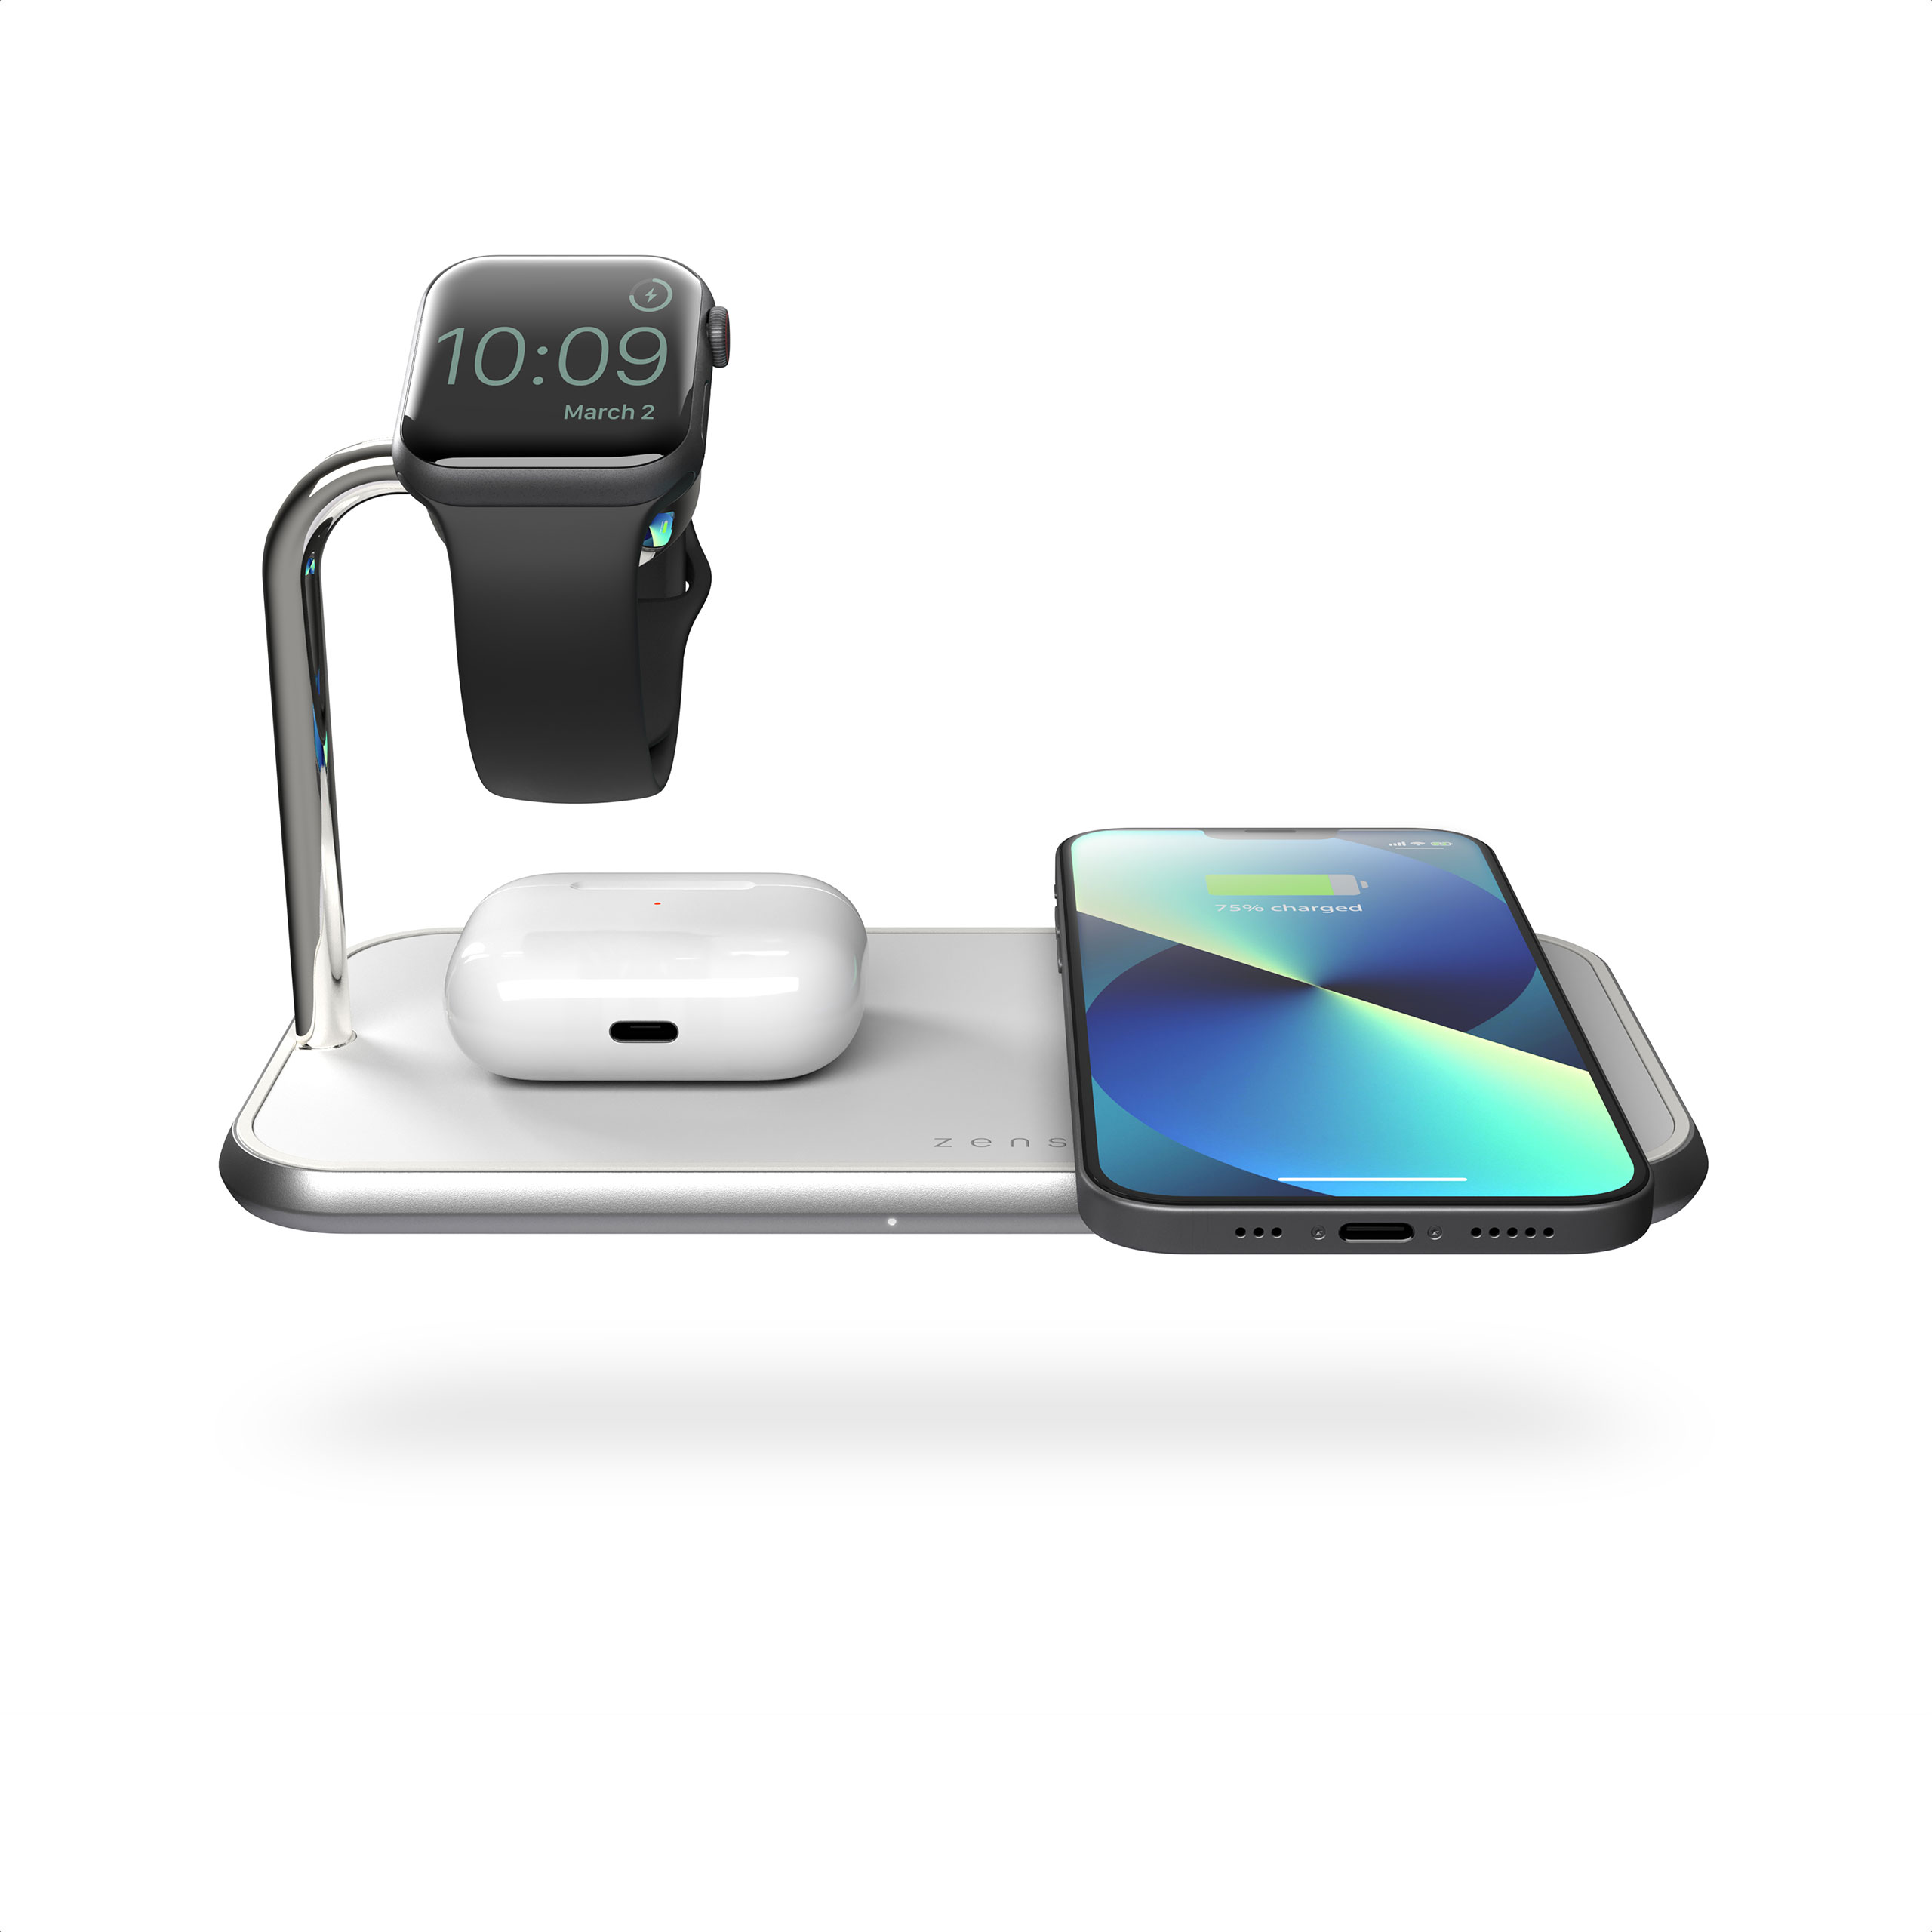 ZEDC05W - Zens Dual+Watch Aluminium Wireless Charger White Front View With Devices